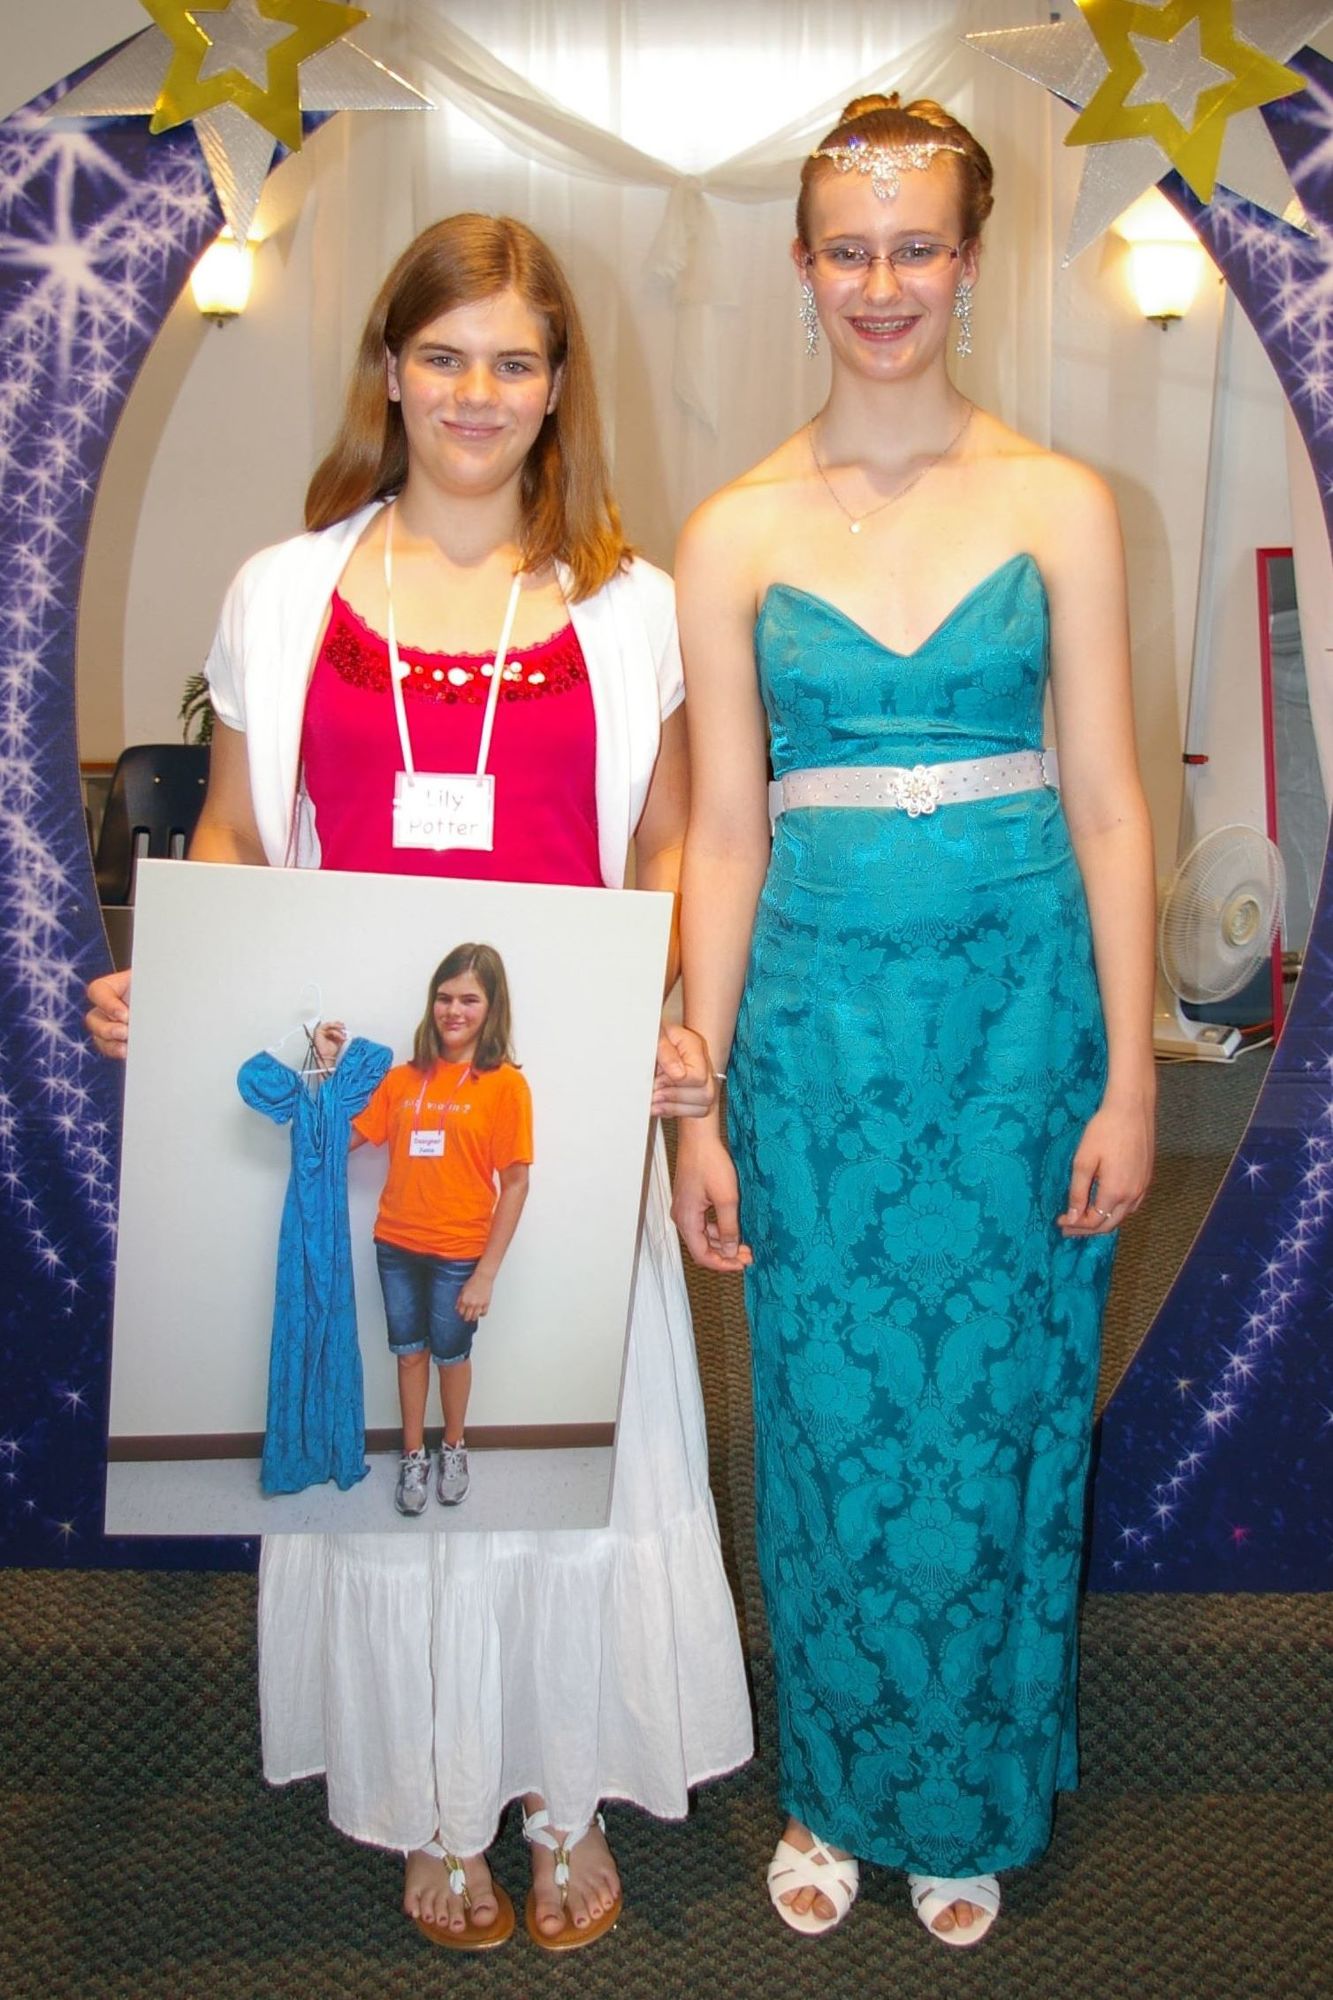 Lily Potter first ventured into fashion and design competitions in 2014 when she transformed this dress to fit her older sister, Cypress, for Cinderella Project Runway. Courtesy photo.